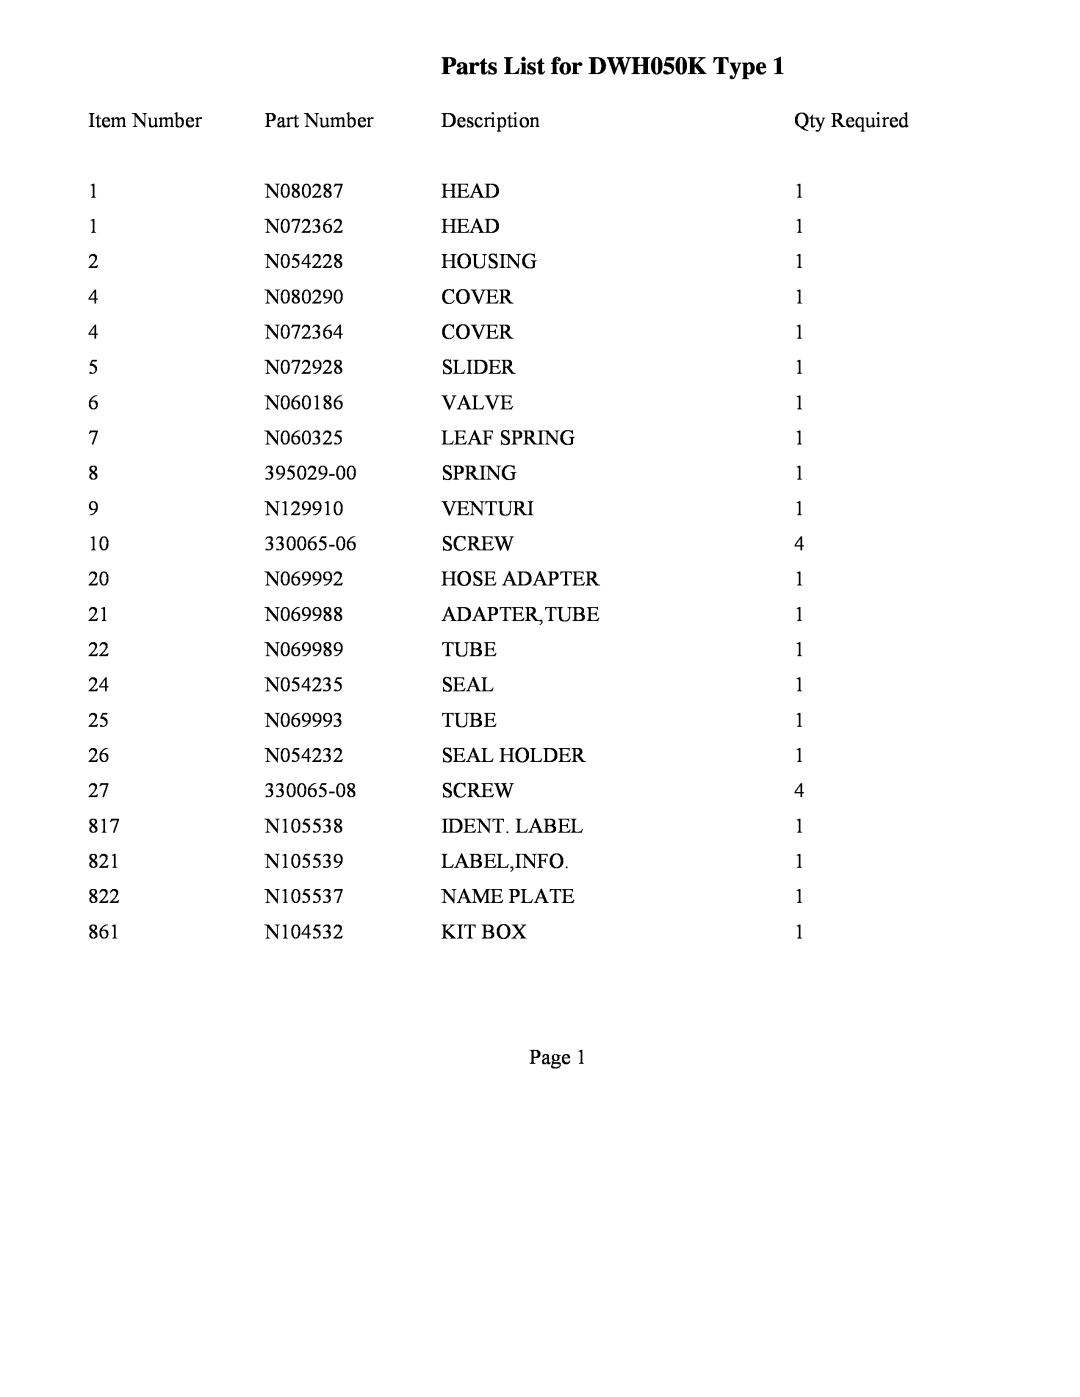 DeWalt manual Parts List for DWH050K Type, Qty Required 